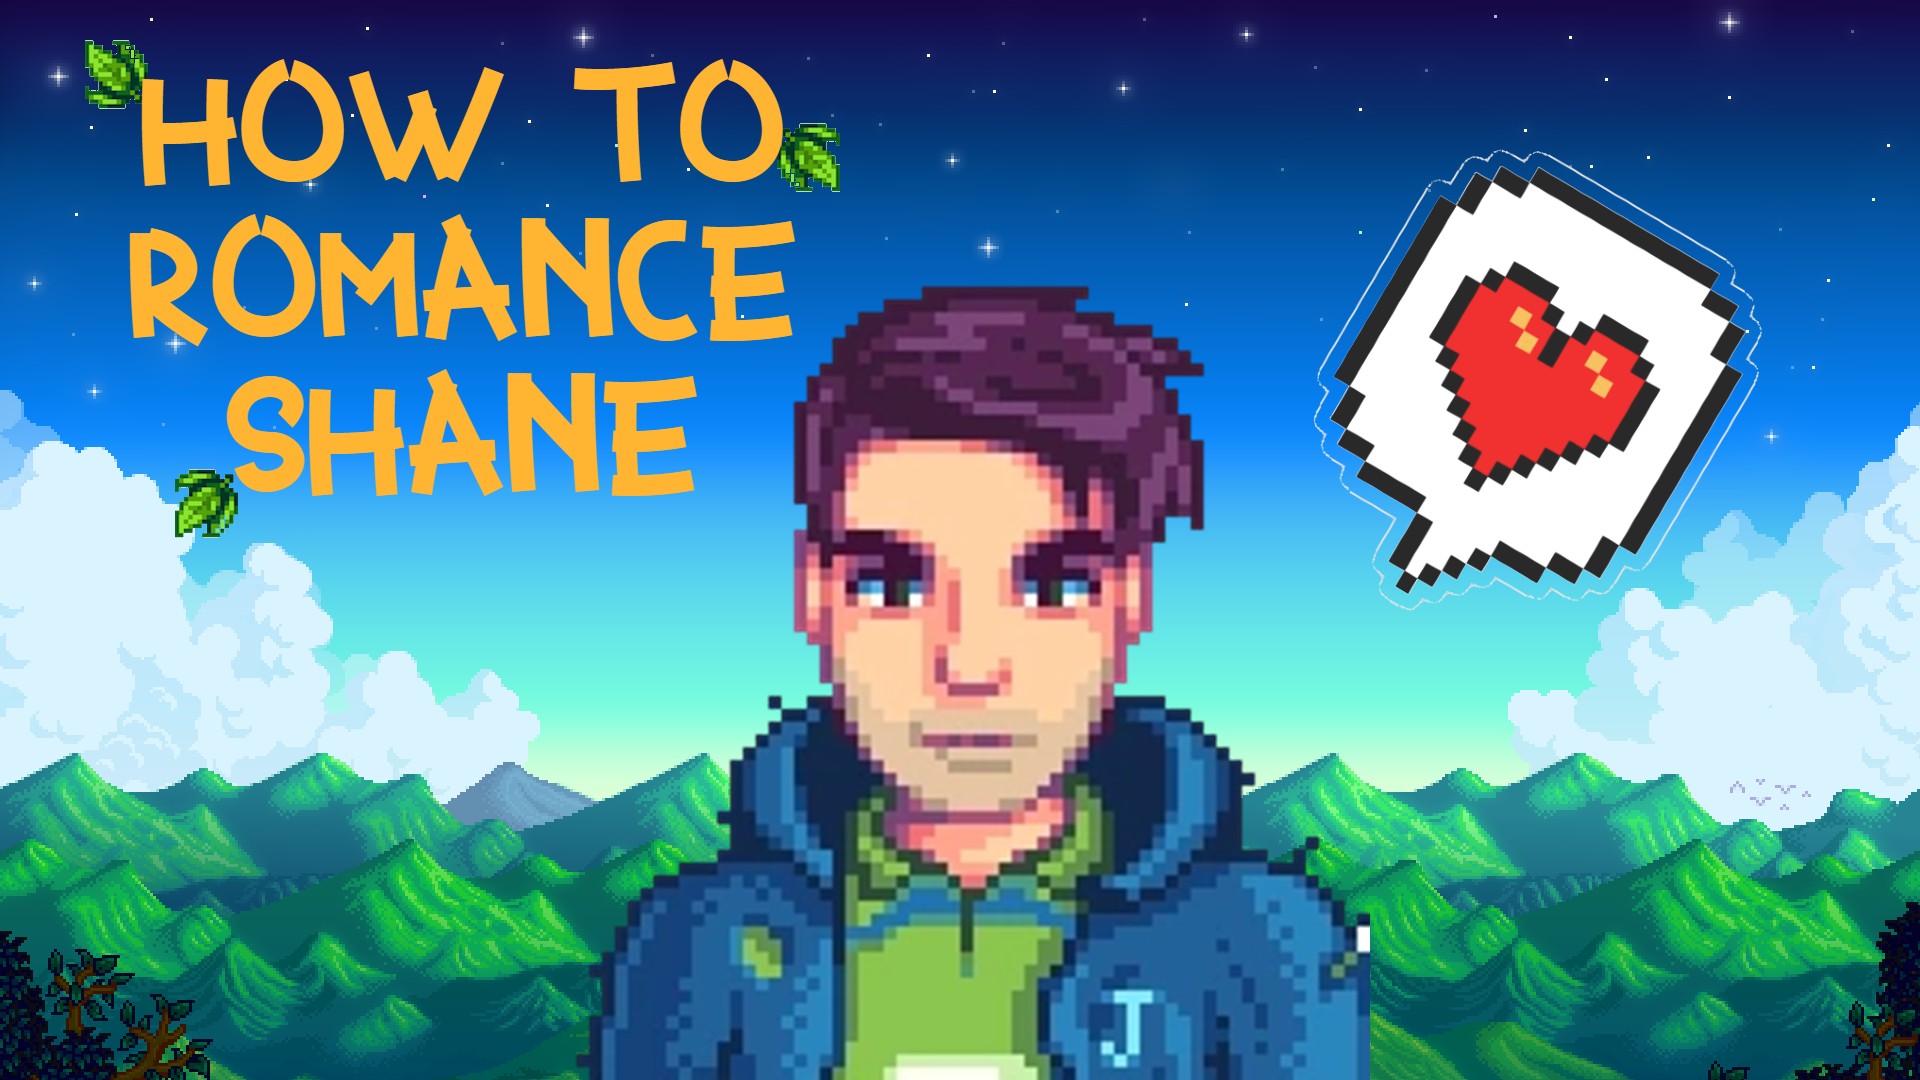 How to Romance Shane in Stardew Valley